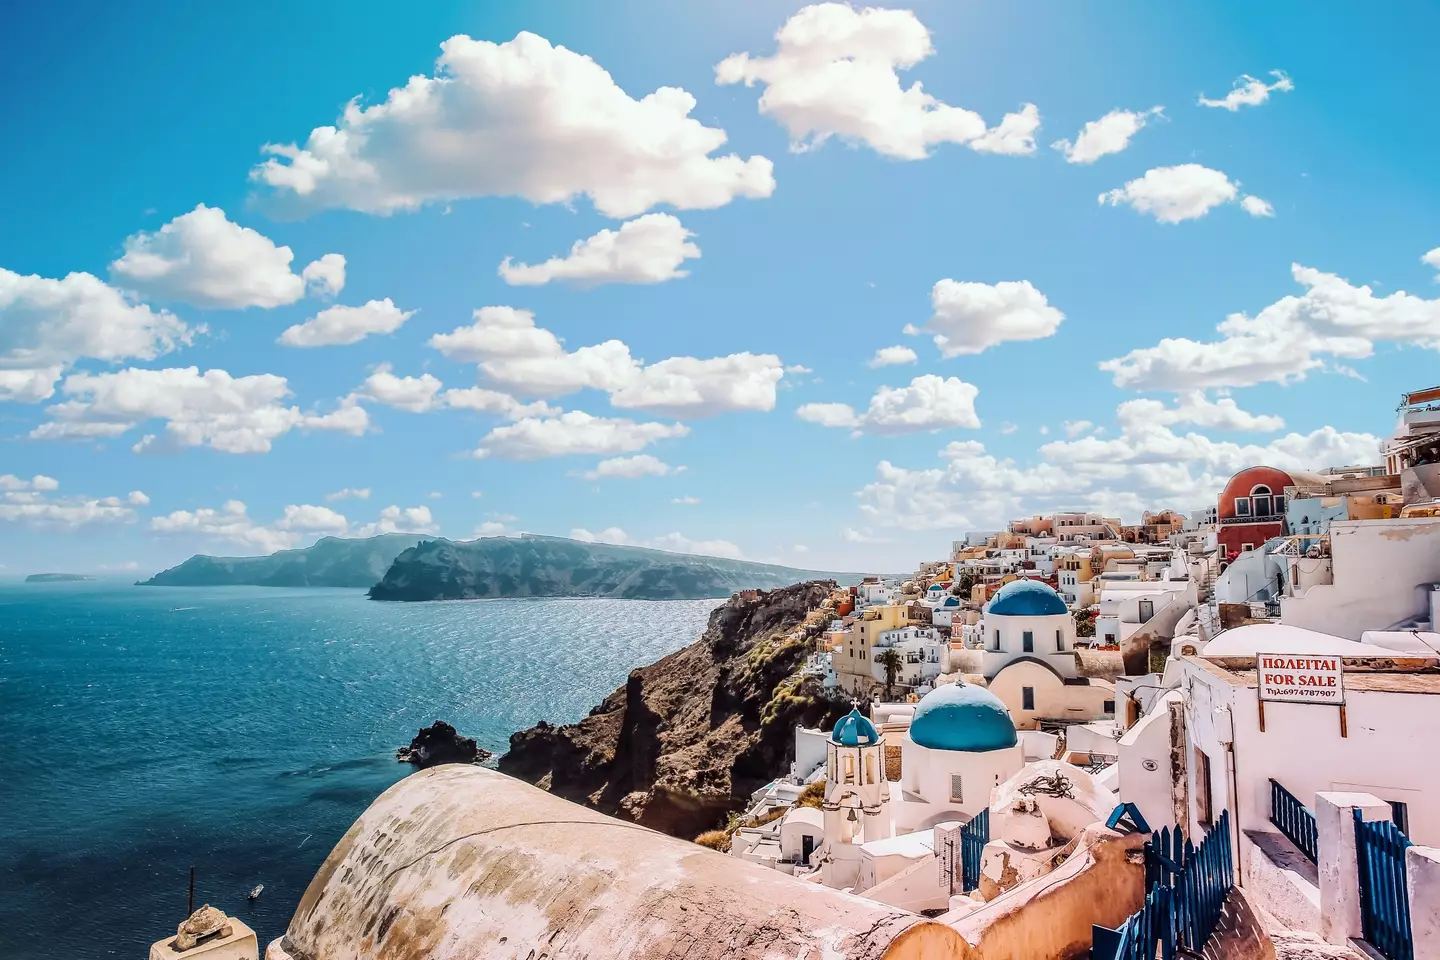 Bargain hunters lost their minds at the price of the seven-day trip to Santorini.